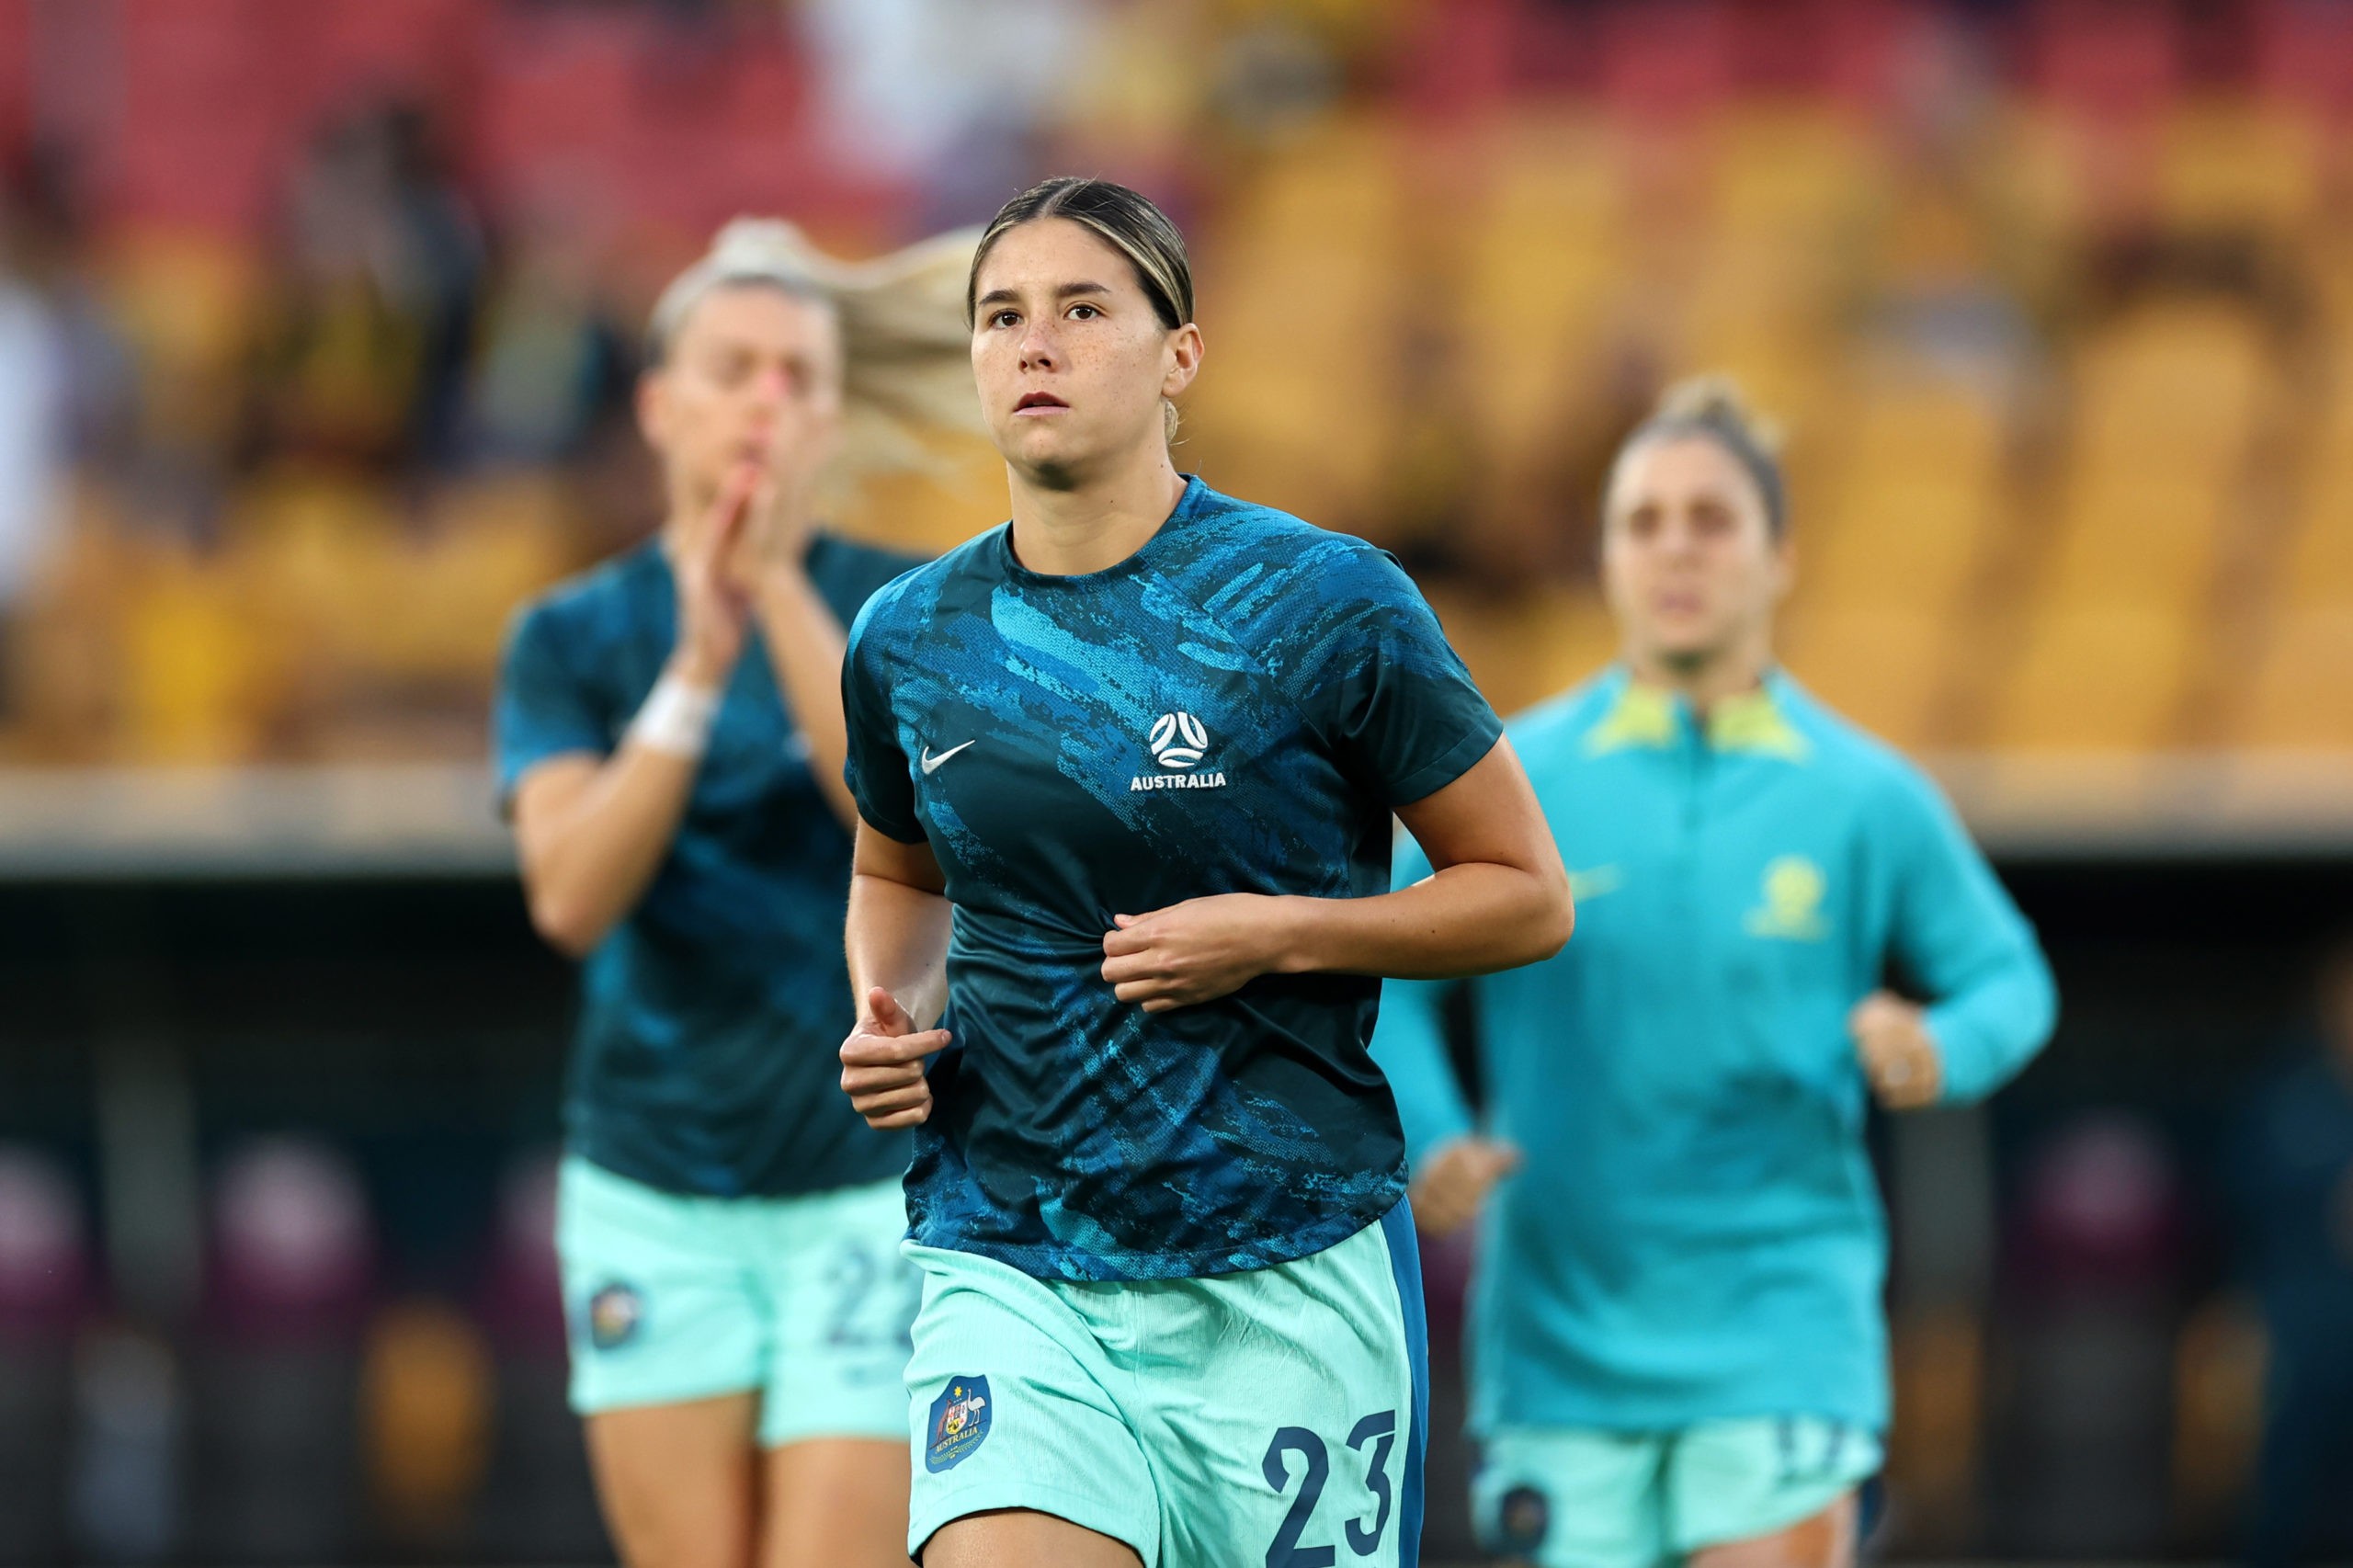 BRISBANE, AUSTRALIA - AUGUST 19: Kyra Cooney-Cross of Australia warms up prior to the FIFA Women's World Cup Australia & New Zealand 2023 Third Place Match match between Sweden and Australia at Brisbane Stadium on August 19, 2023 in Brisbane, Australia. (Photo by Cameron Spencer/Getty Images)